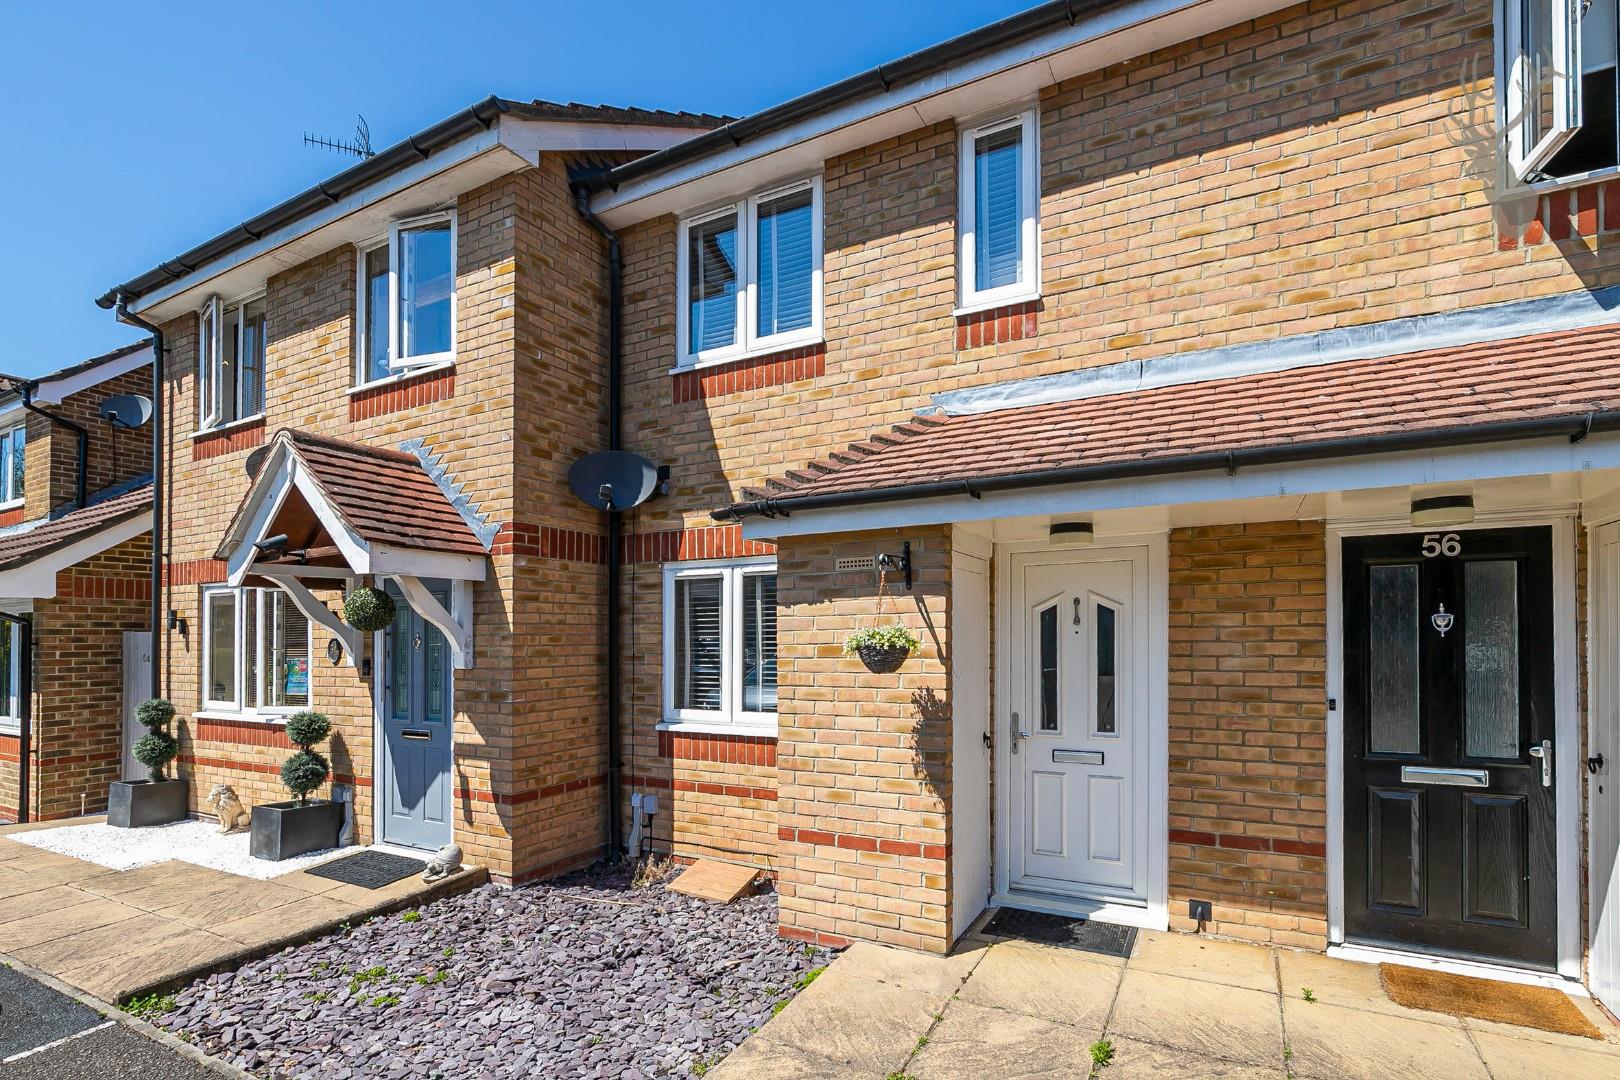 Similar Property: House - Terraced in Harlow